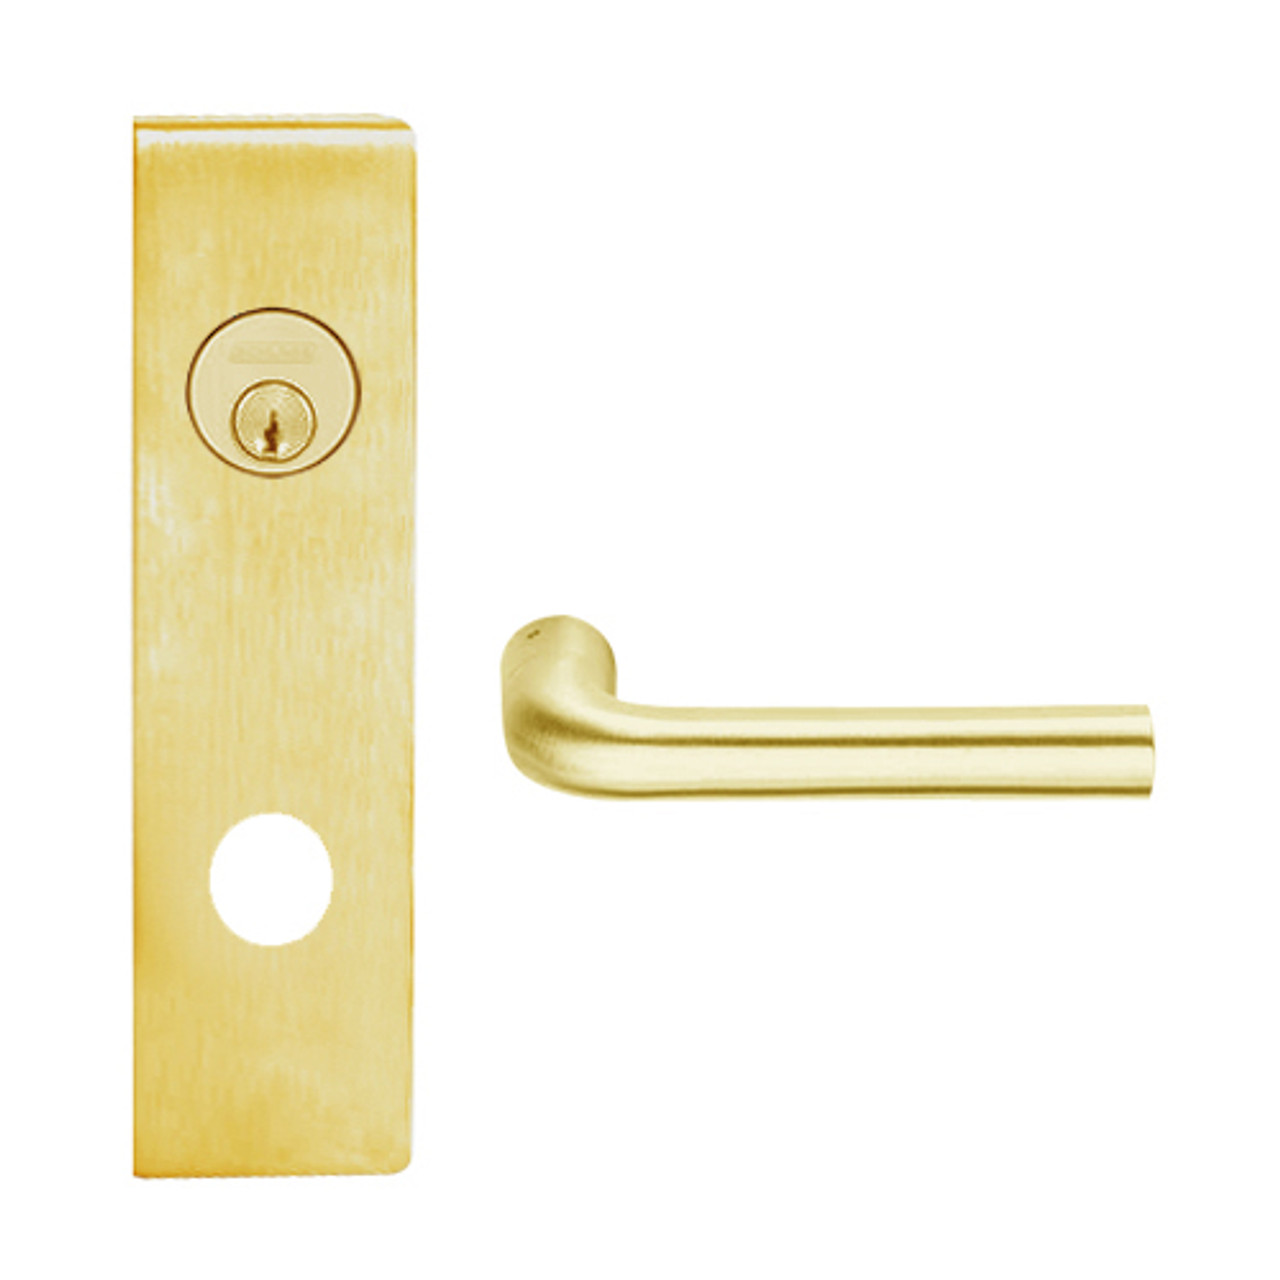 L9070L-02N-605 Schlage L Series Less Cylinder Classroom Commercial Mortise Lock with 02 Cast Lever Design in Bright Brass